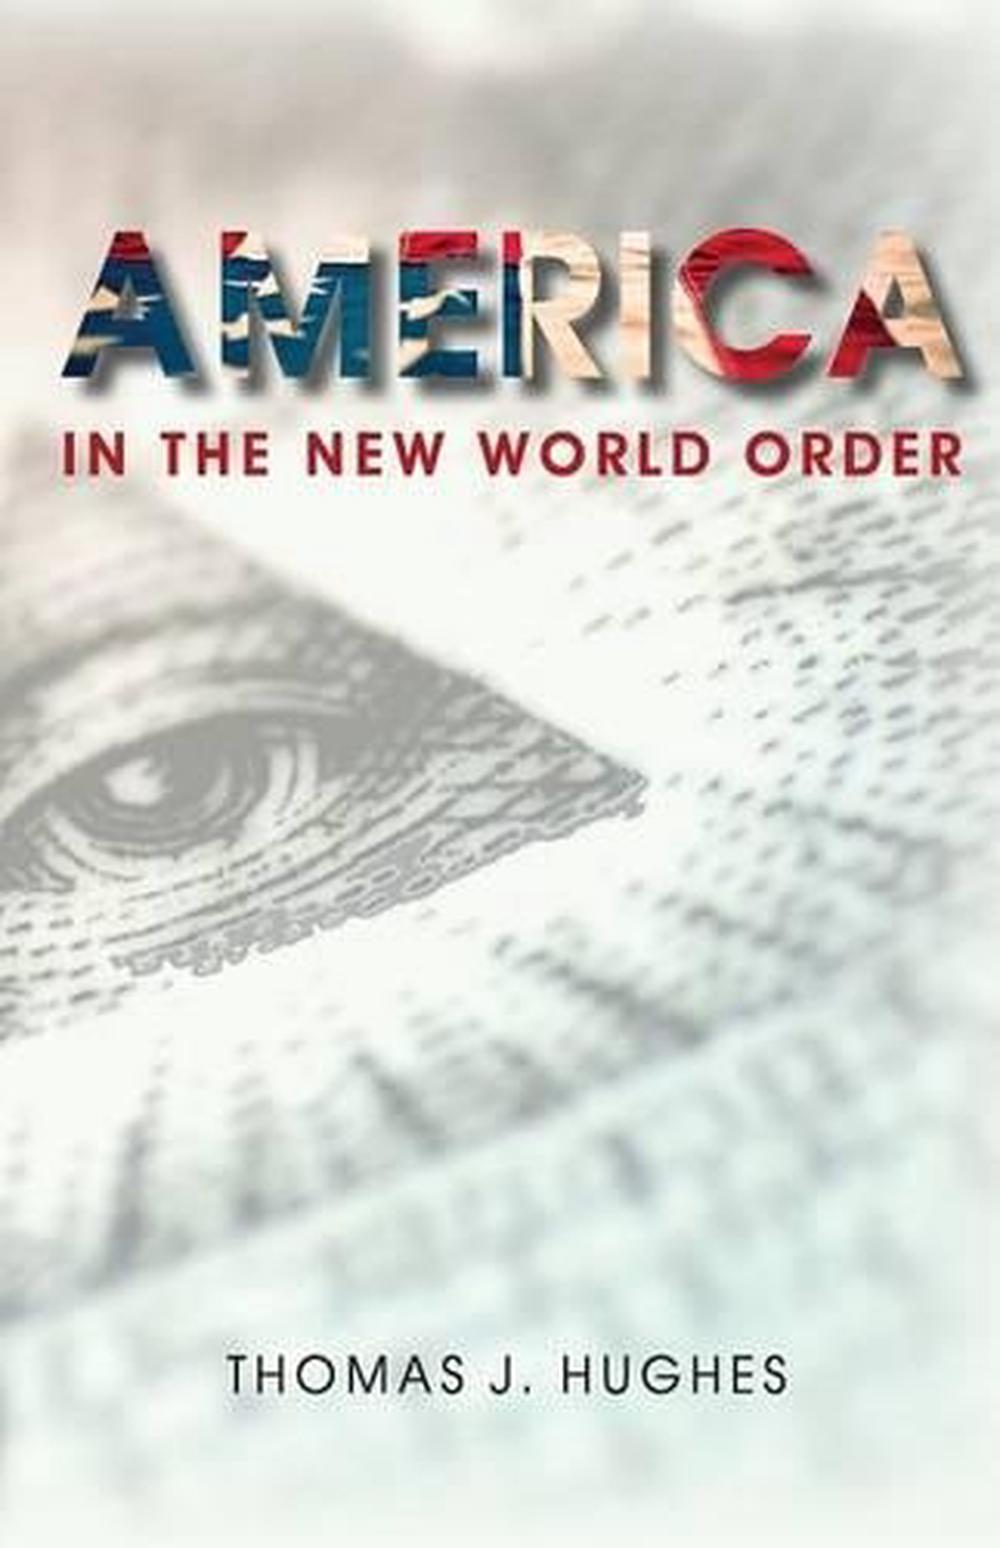 America in the New World Order by Thomas J. Hughes (English) Paperback